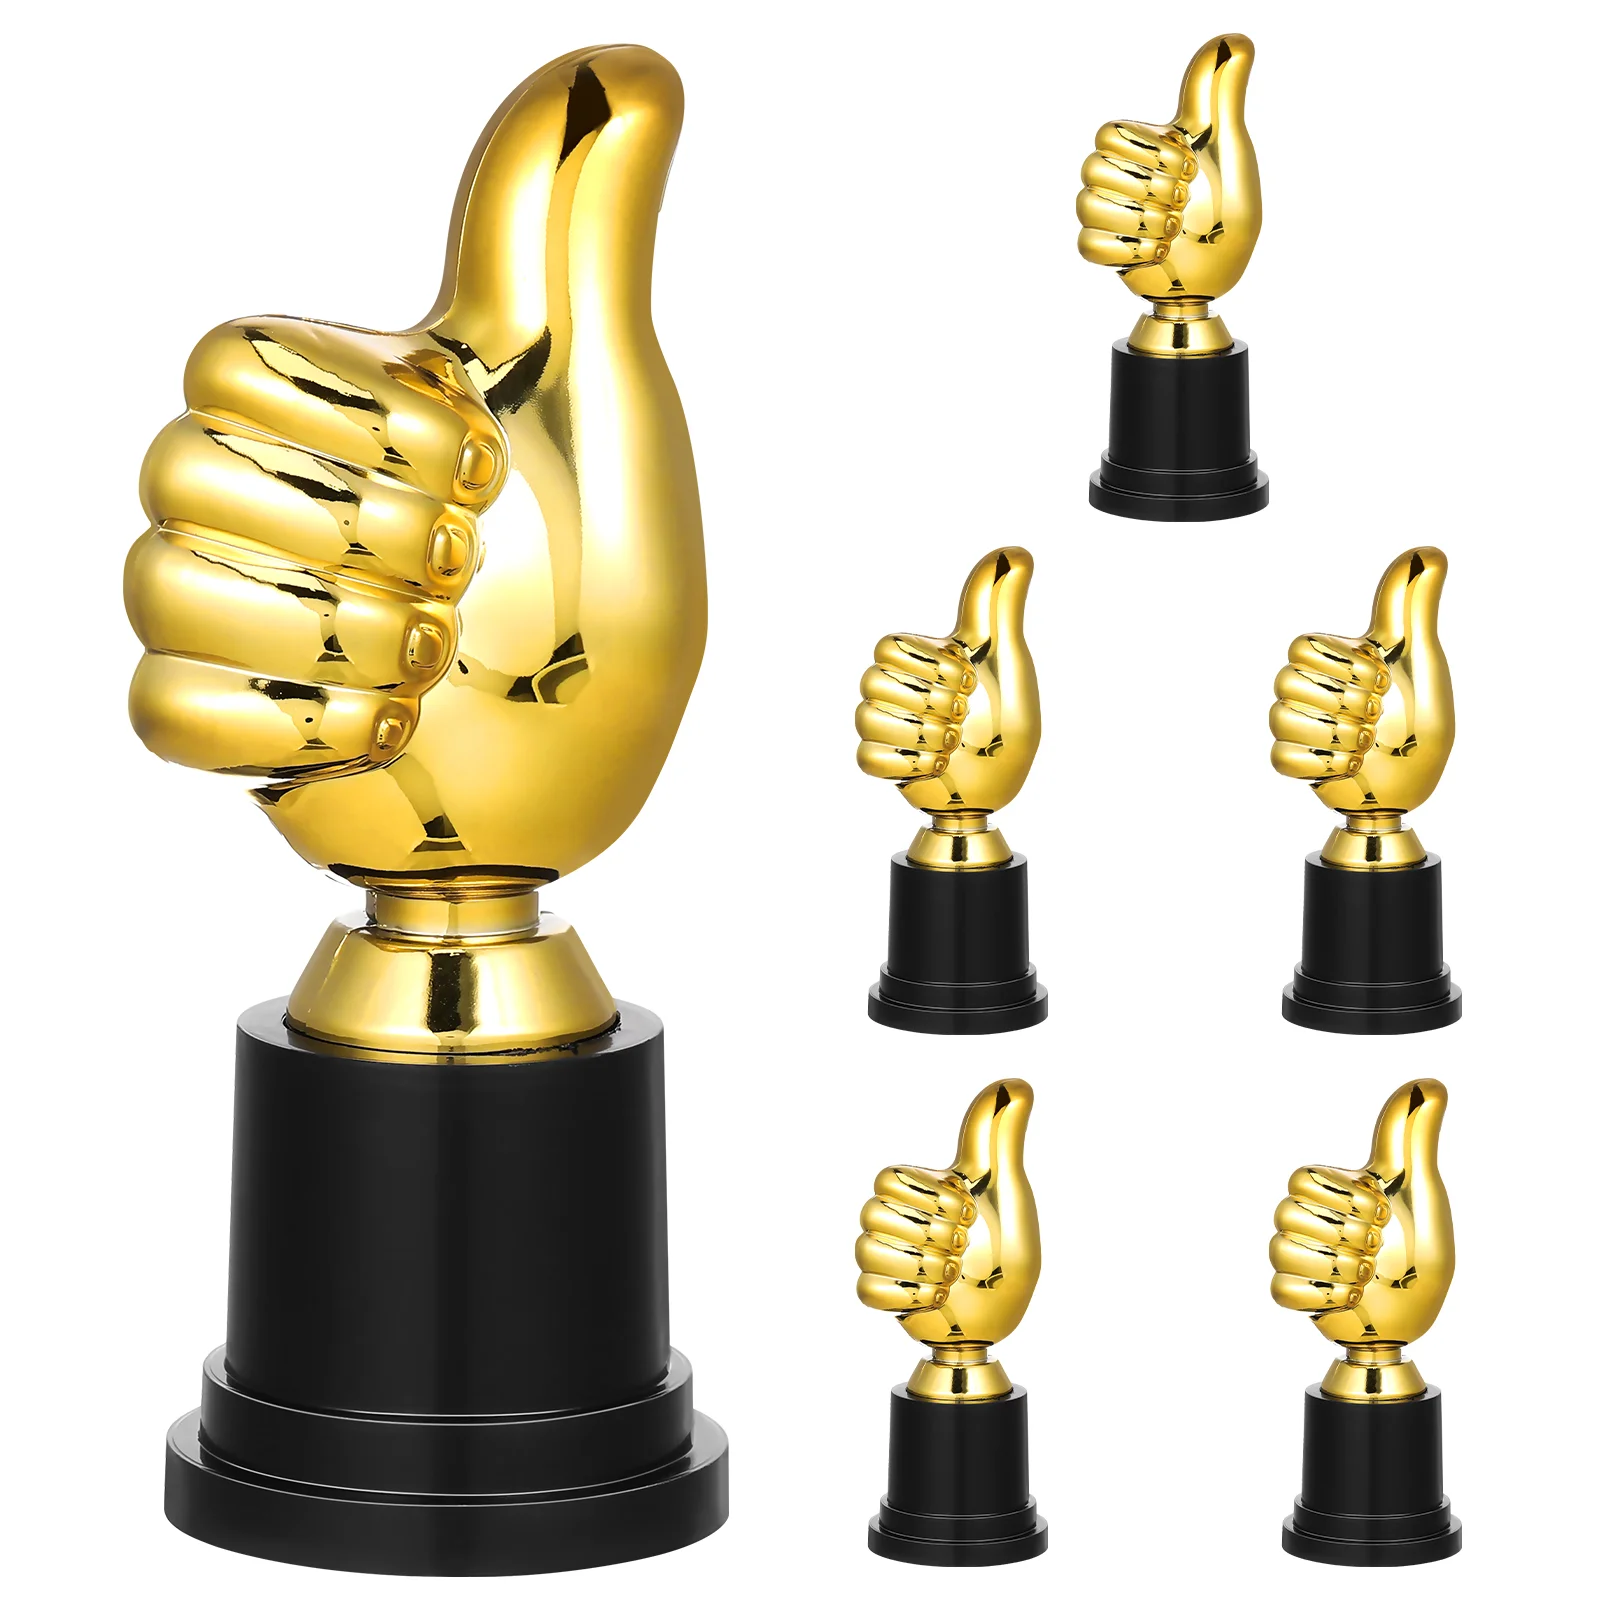 

6 Pcs Thumb Trophies Award Trophy Winner Trophy Cup Small Trophy Plastic Trophy For Sports Competition